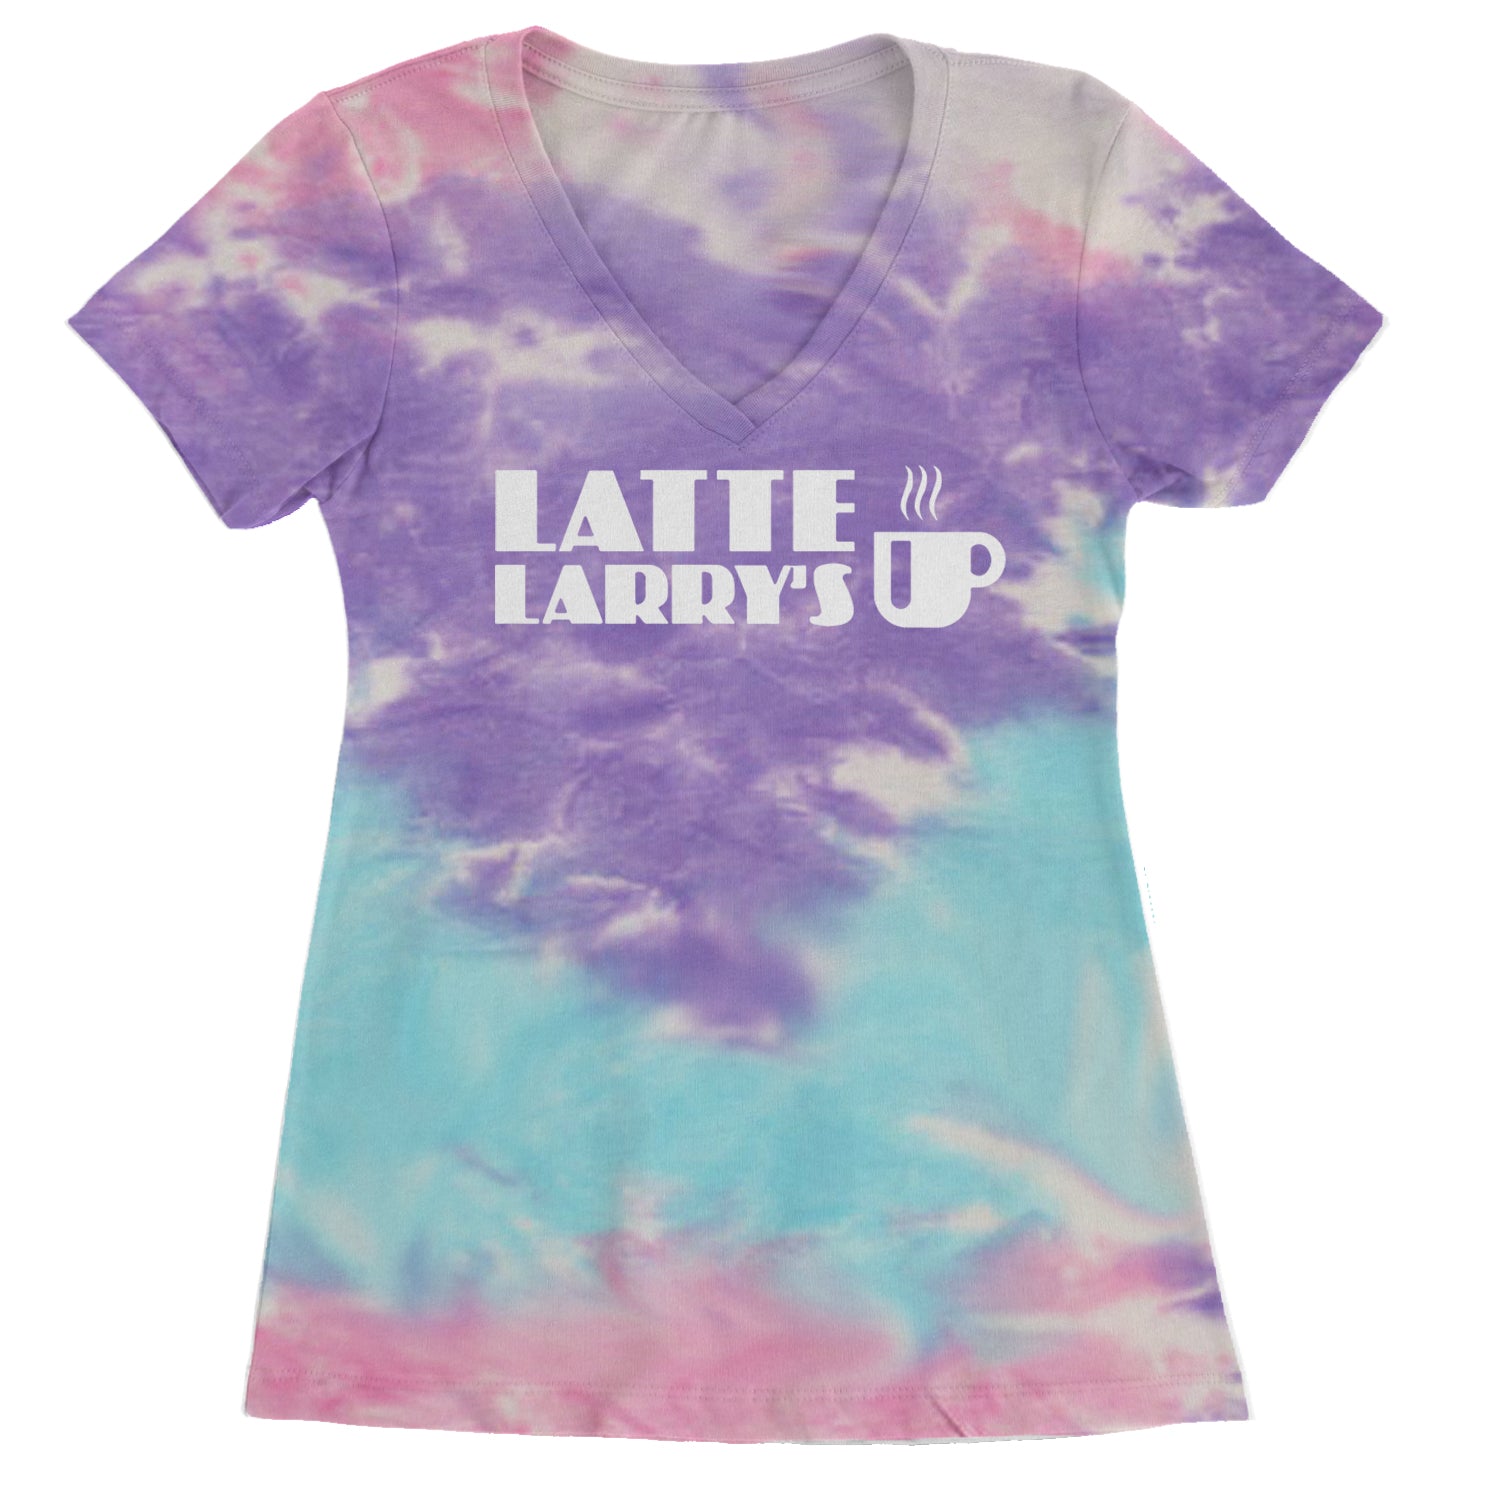 Latte Larry's Enthusiastic Coffee Ladies V-Neck T-shirt Cotton Candy